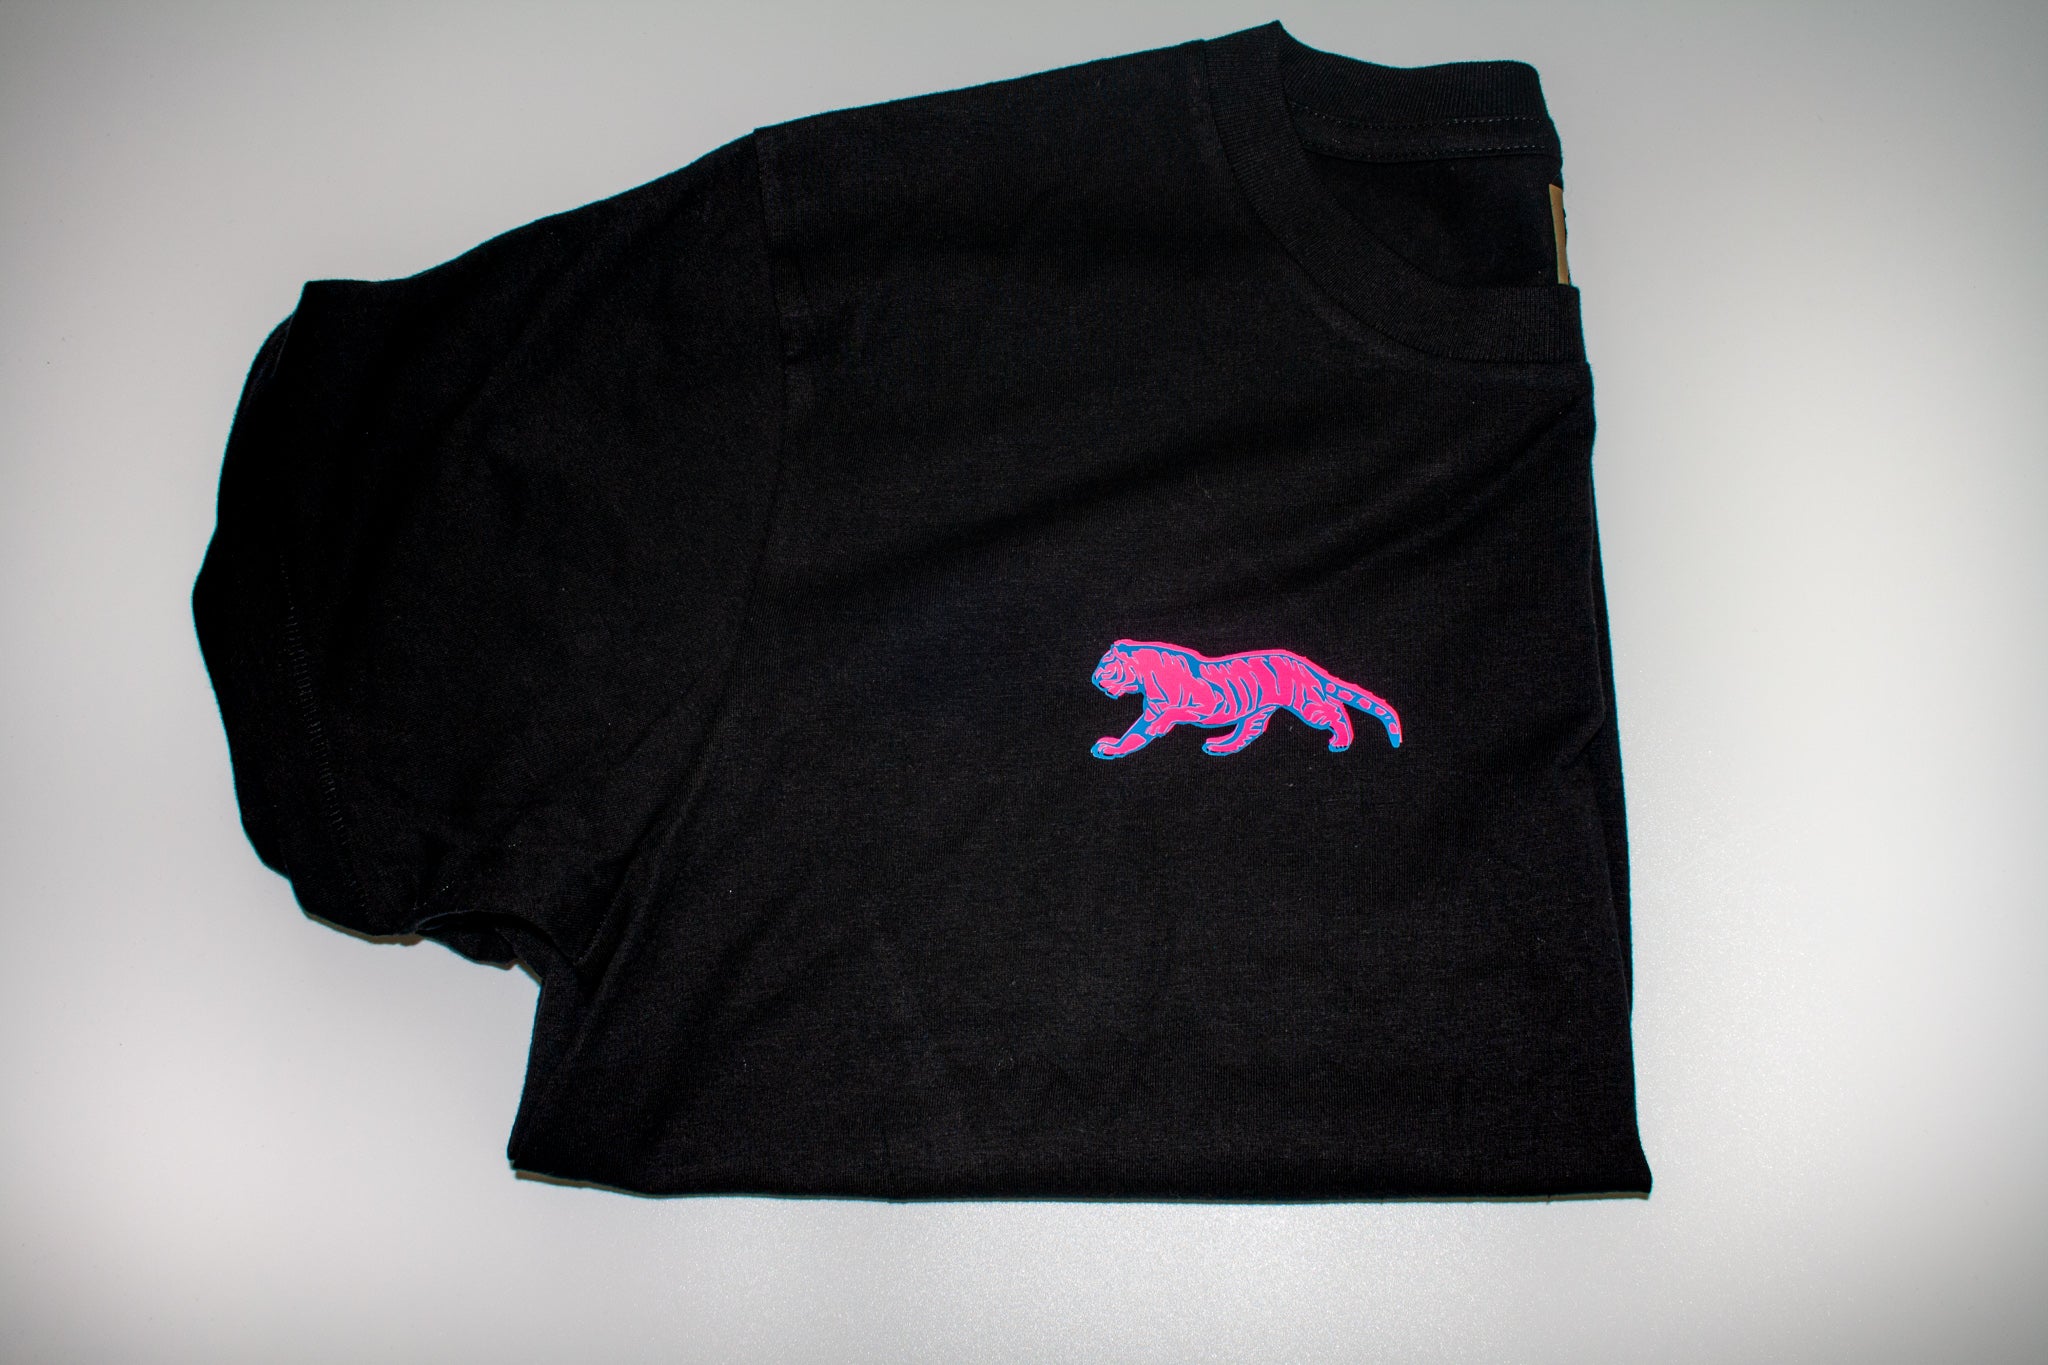 Black T-shirt with Pink and Blue Tiger Design